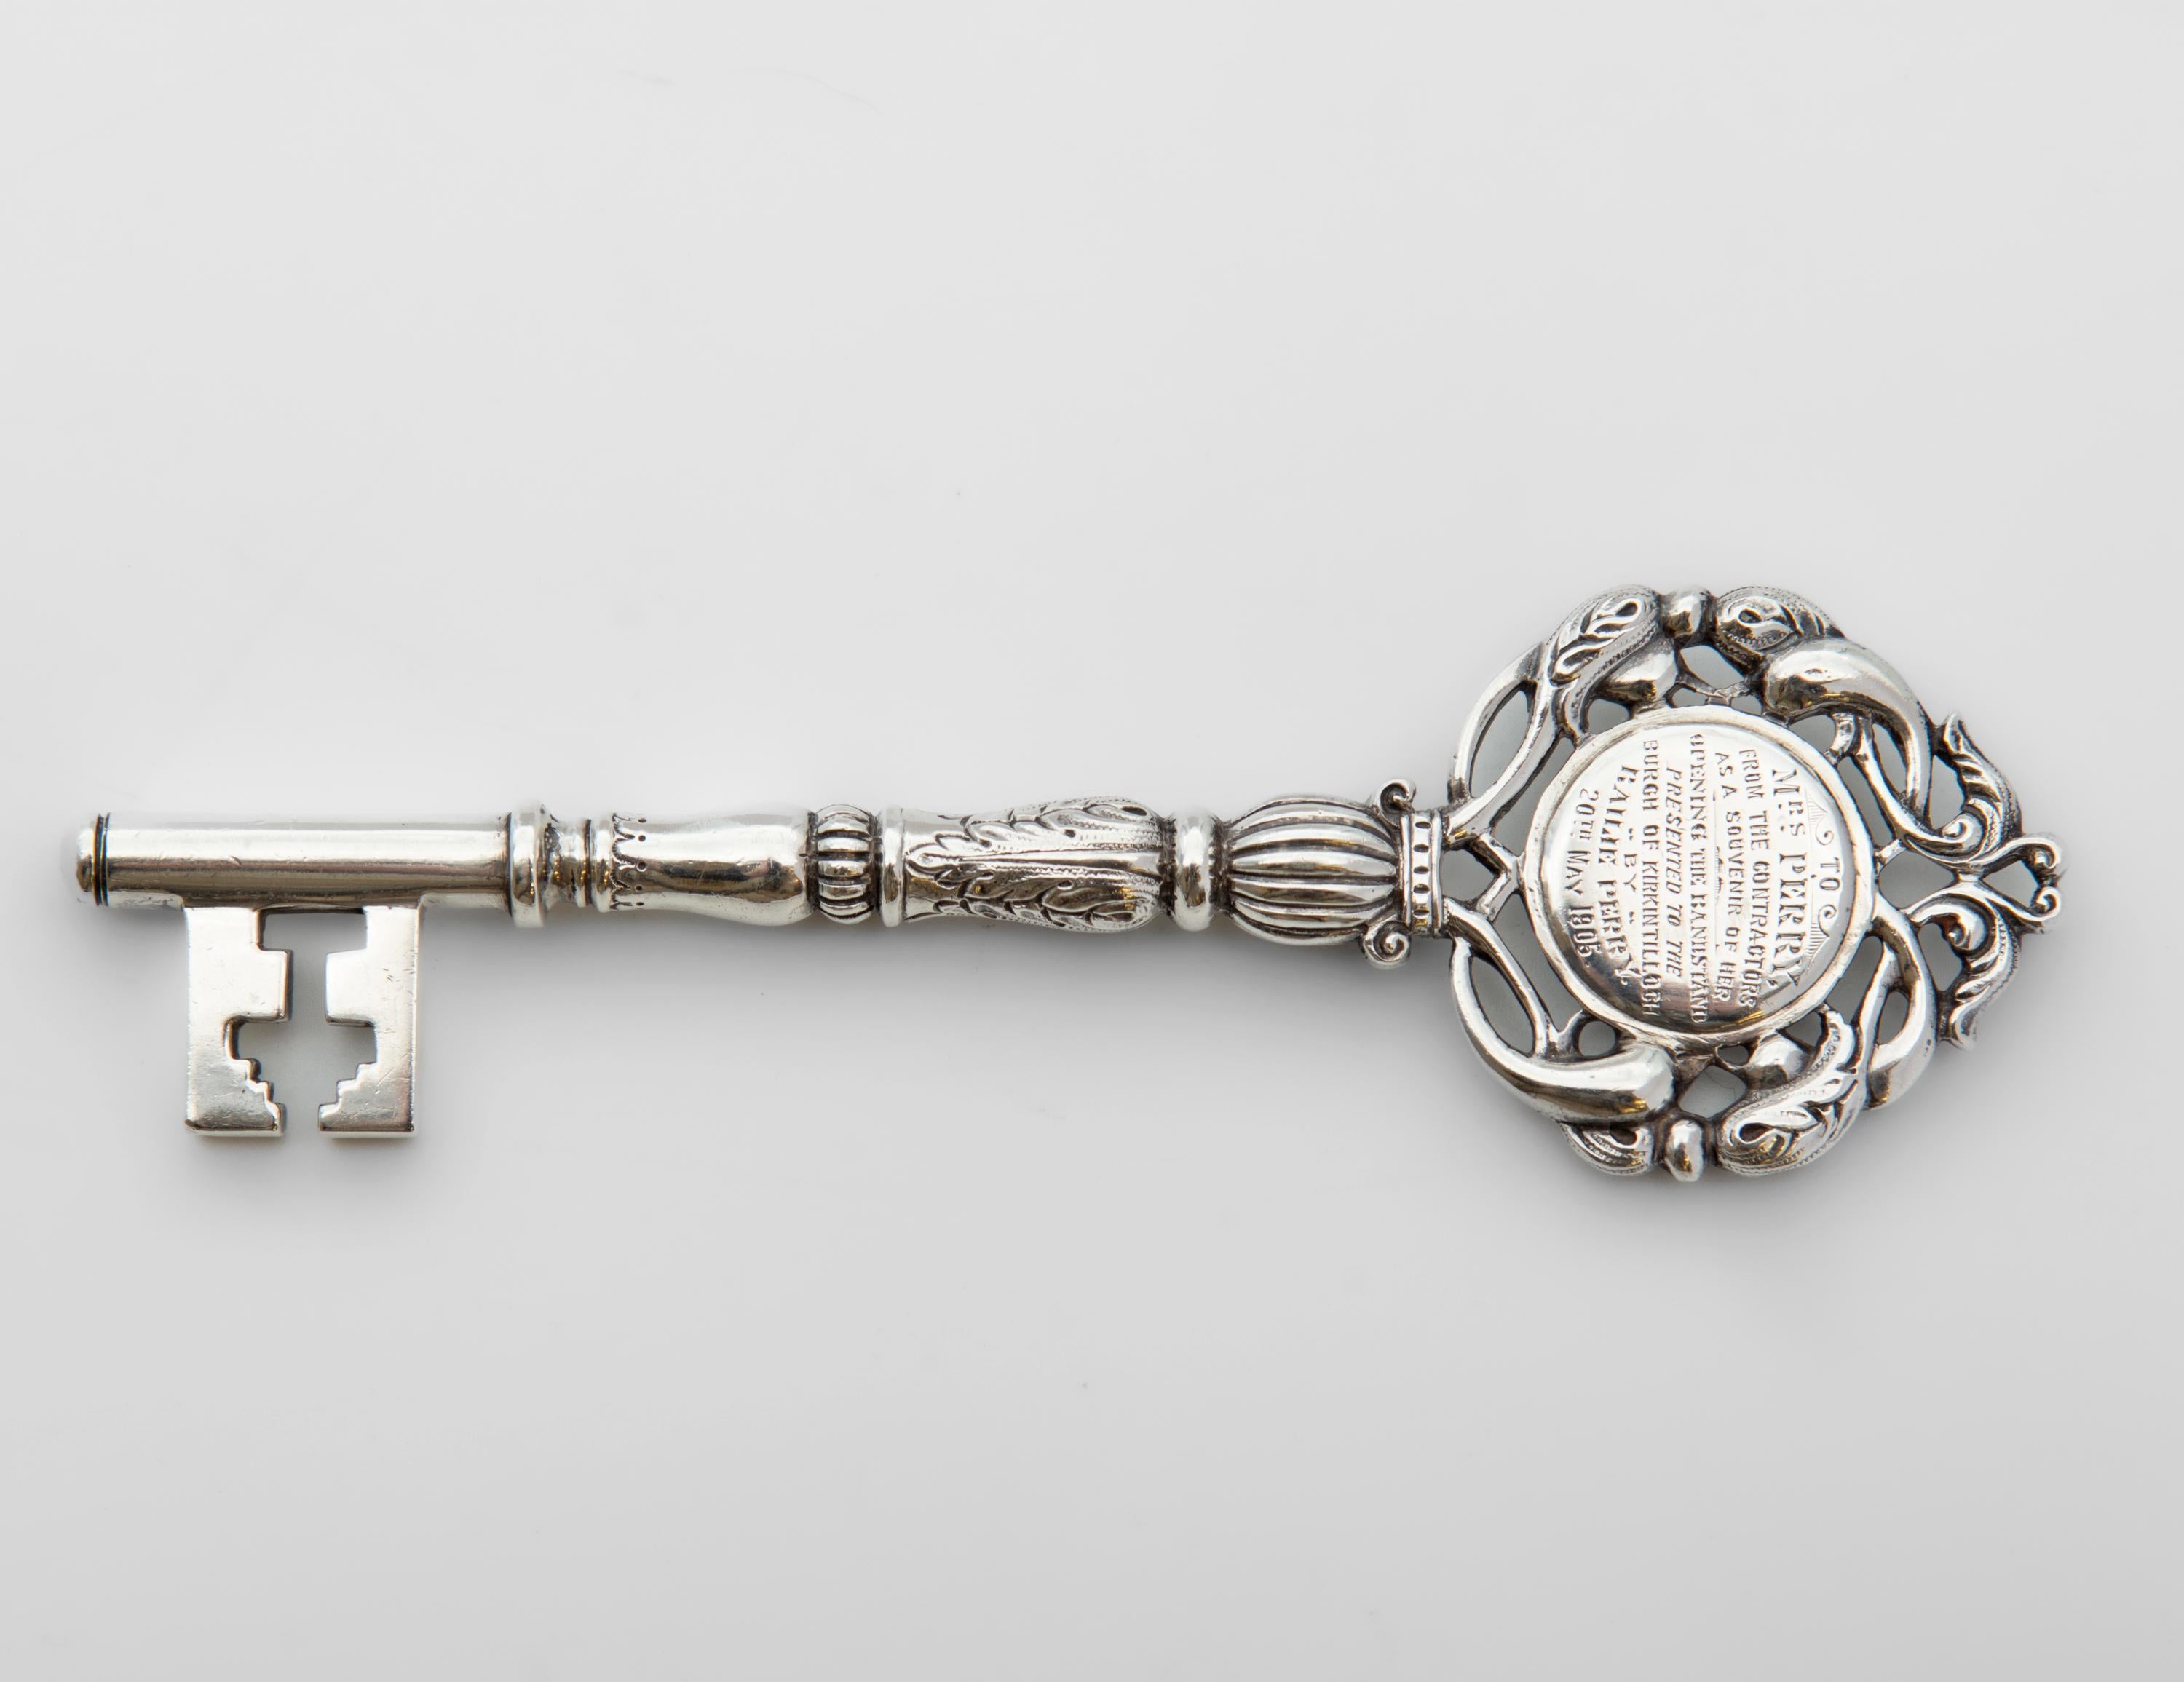 Excellent quality Edwardian solid sterling silver presentation key. Hallmarked in Glasgow in 1904/1905 by James Weir.

Engraved to both sides, one side reads: 